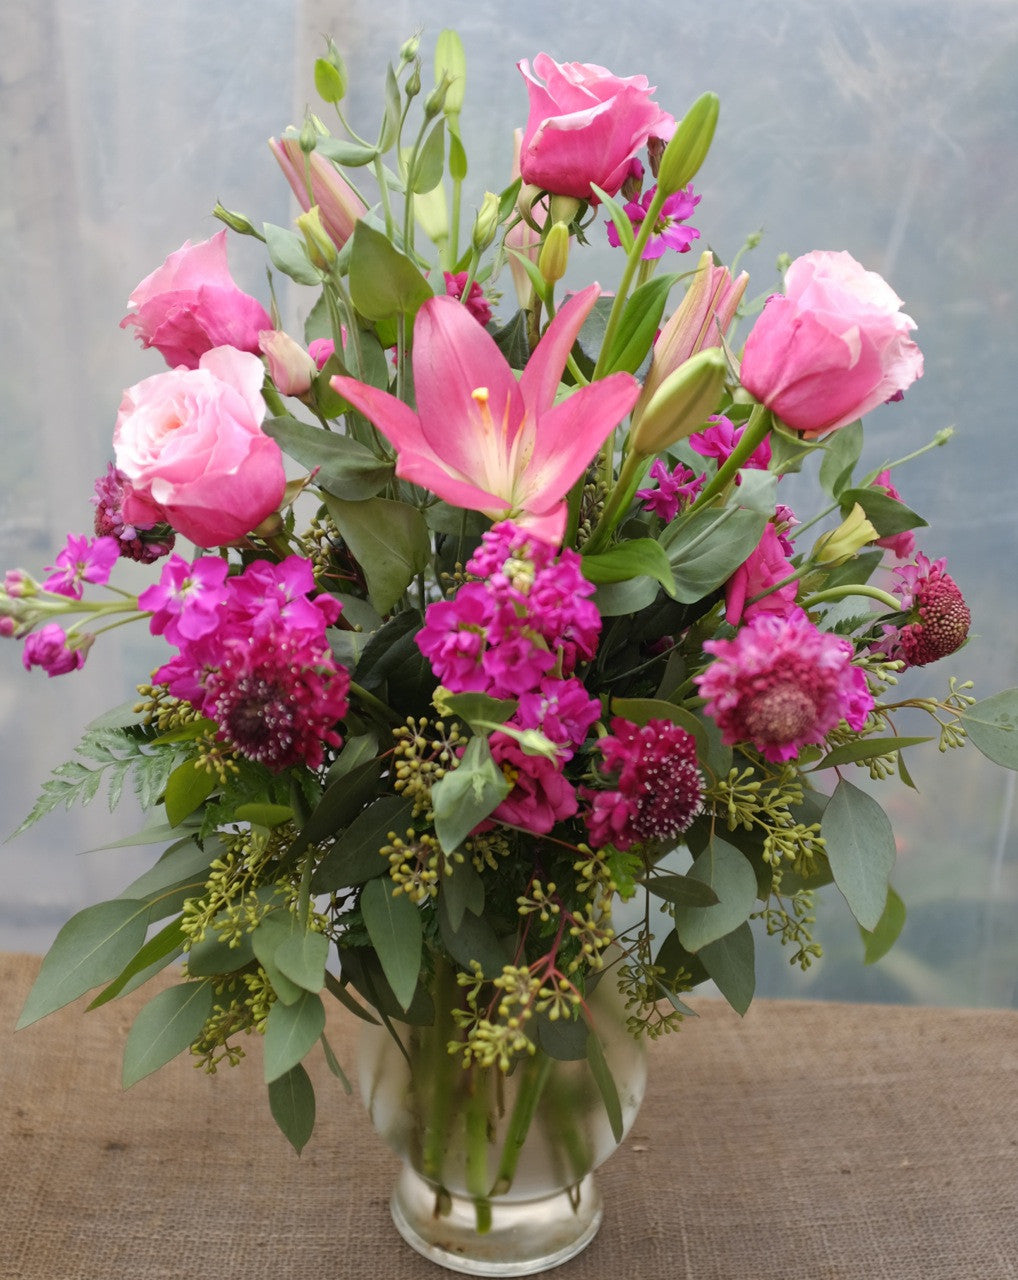 Adelaide Flower Arrangement with Roses, Lilies, and Matthiola 